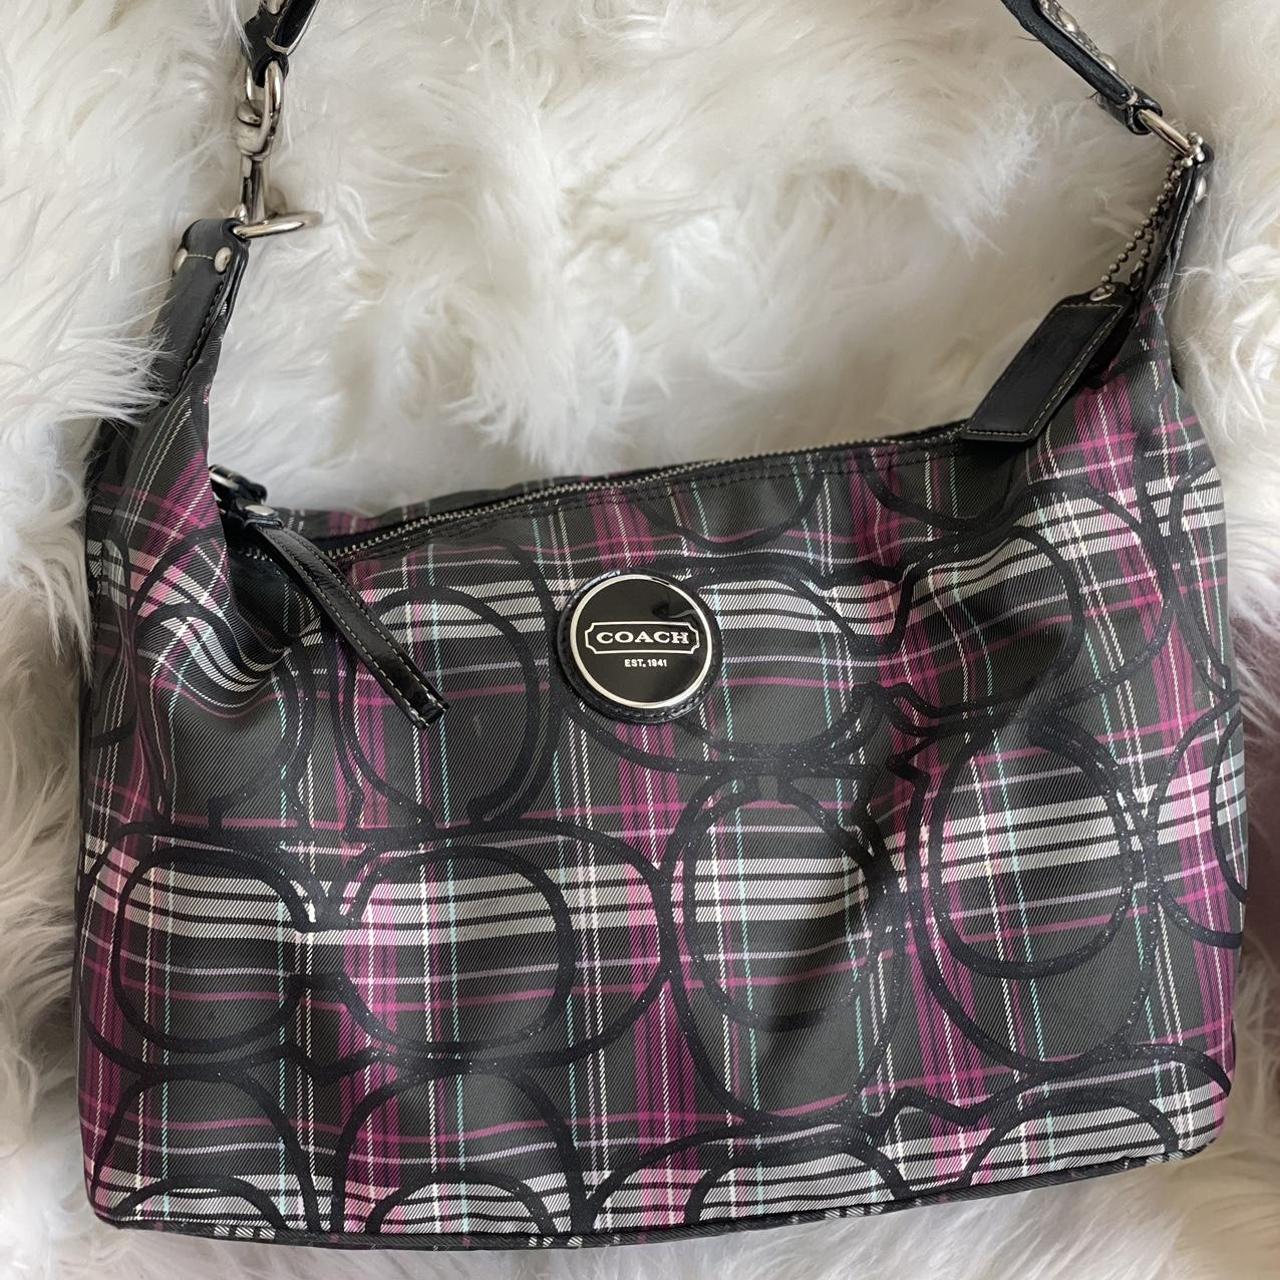 Coach Ashley Purse for Sale in Plymouth, IN - OfferUp